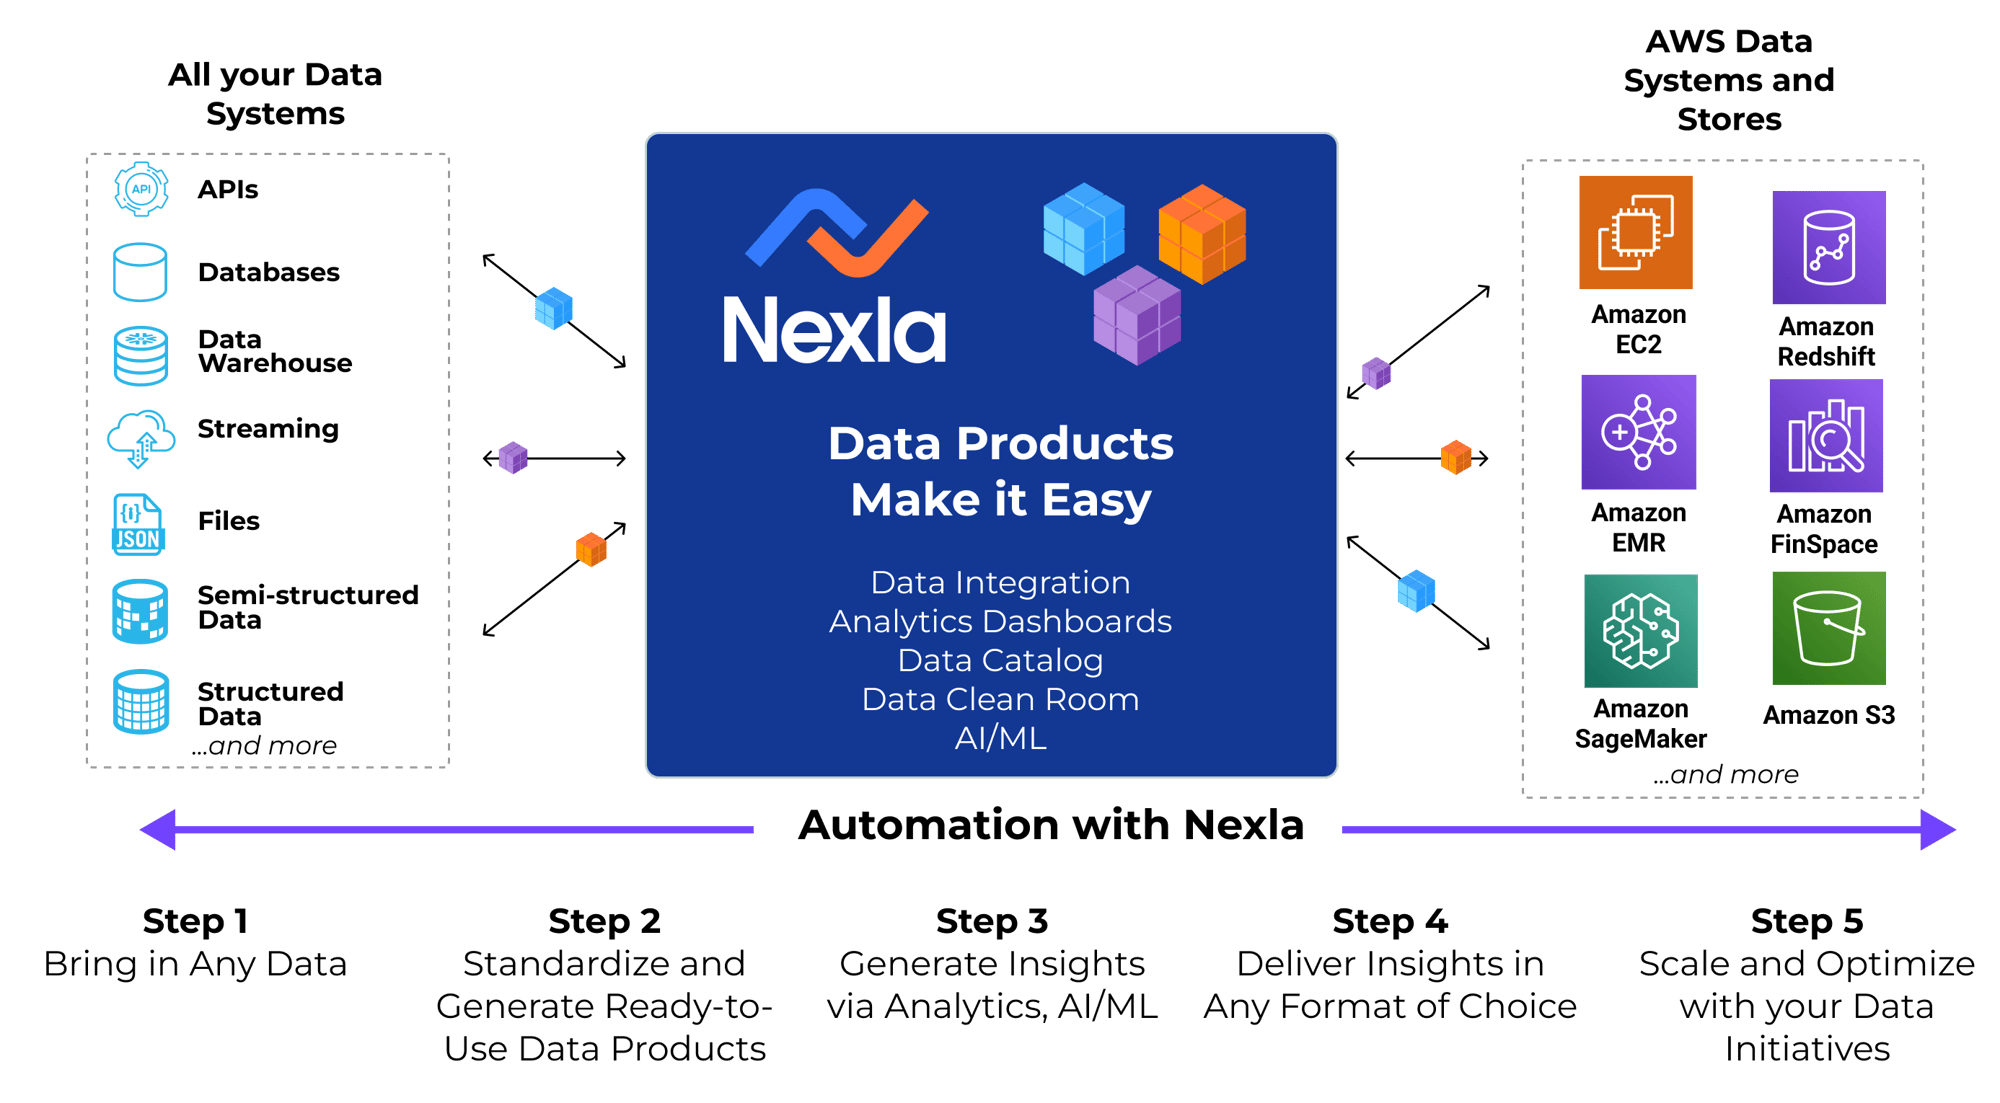 Architecture Diagram describing how Nexla works with AWS systems and services and external data sytems.